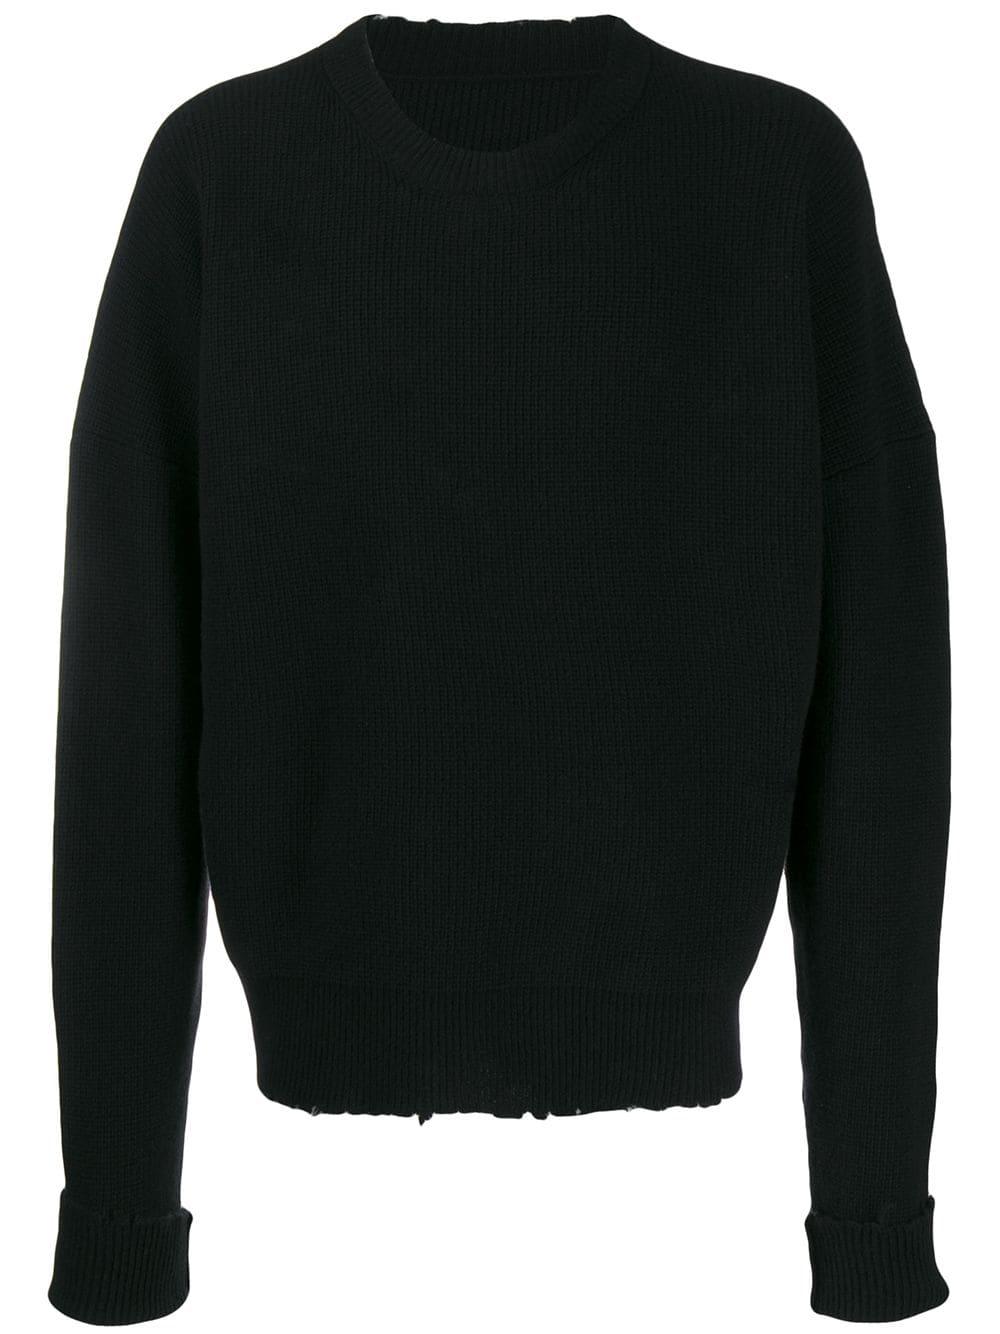 Unravel Project Wool Distressed Jumper in Black for Men - Lyst